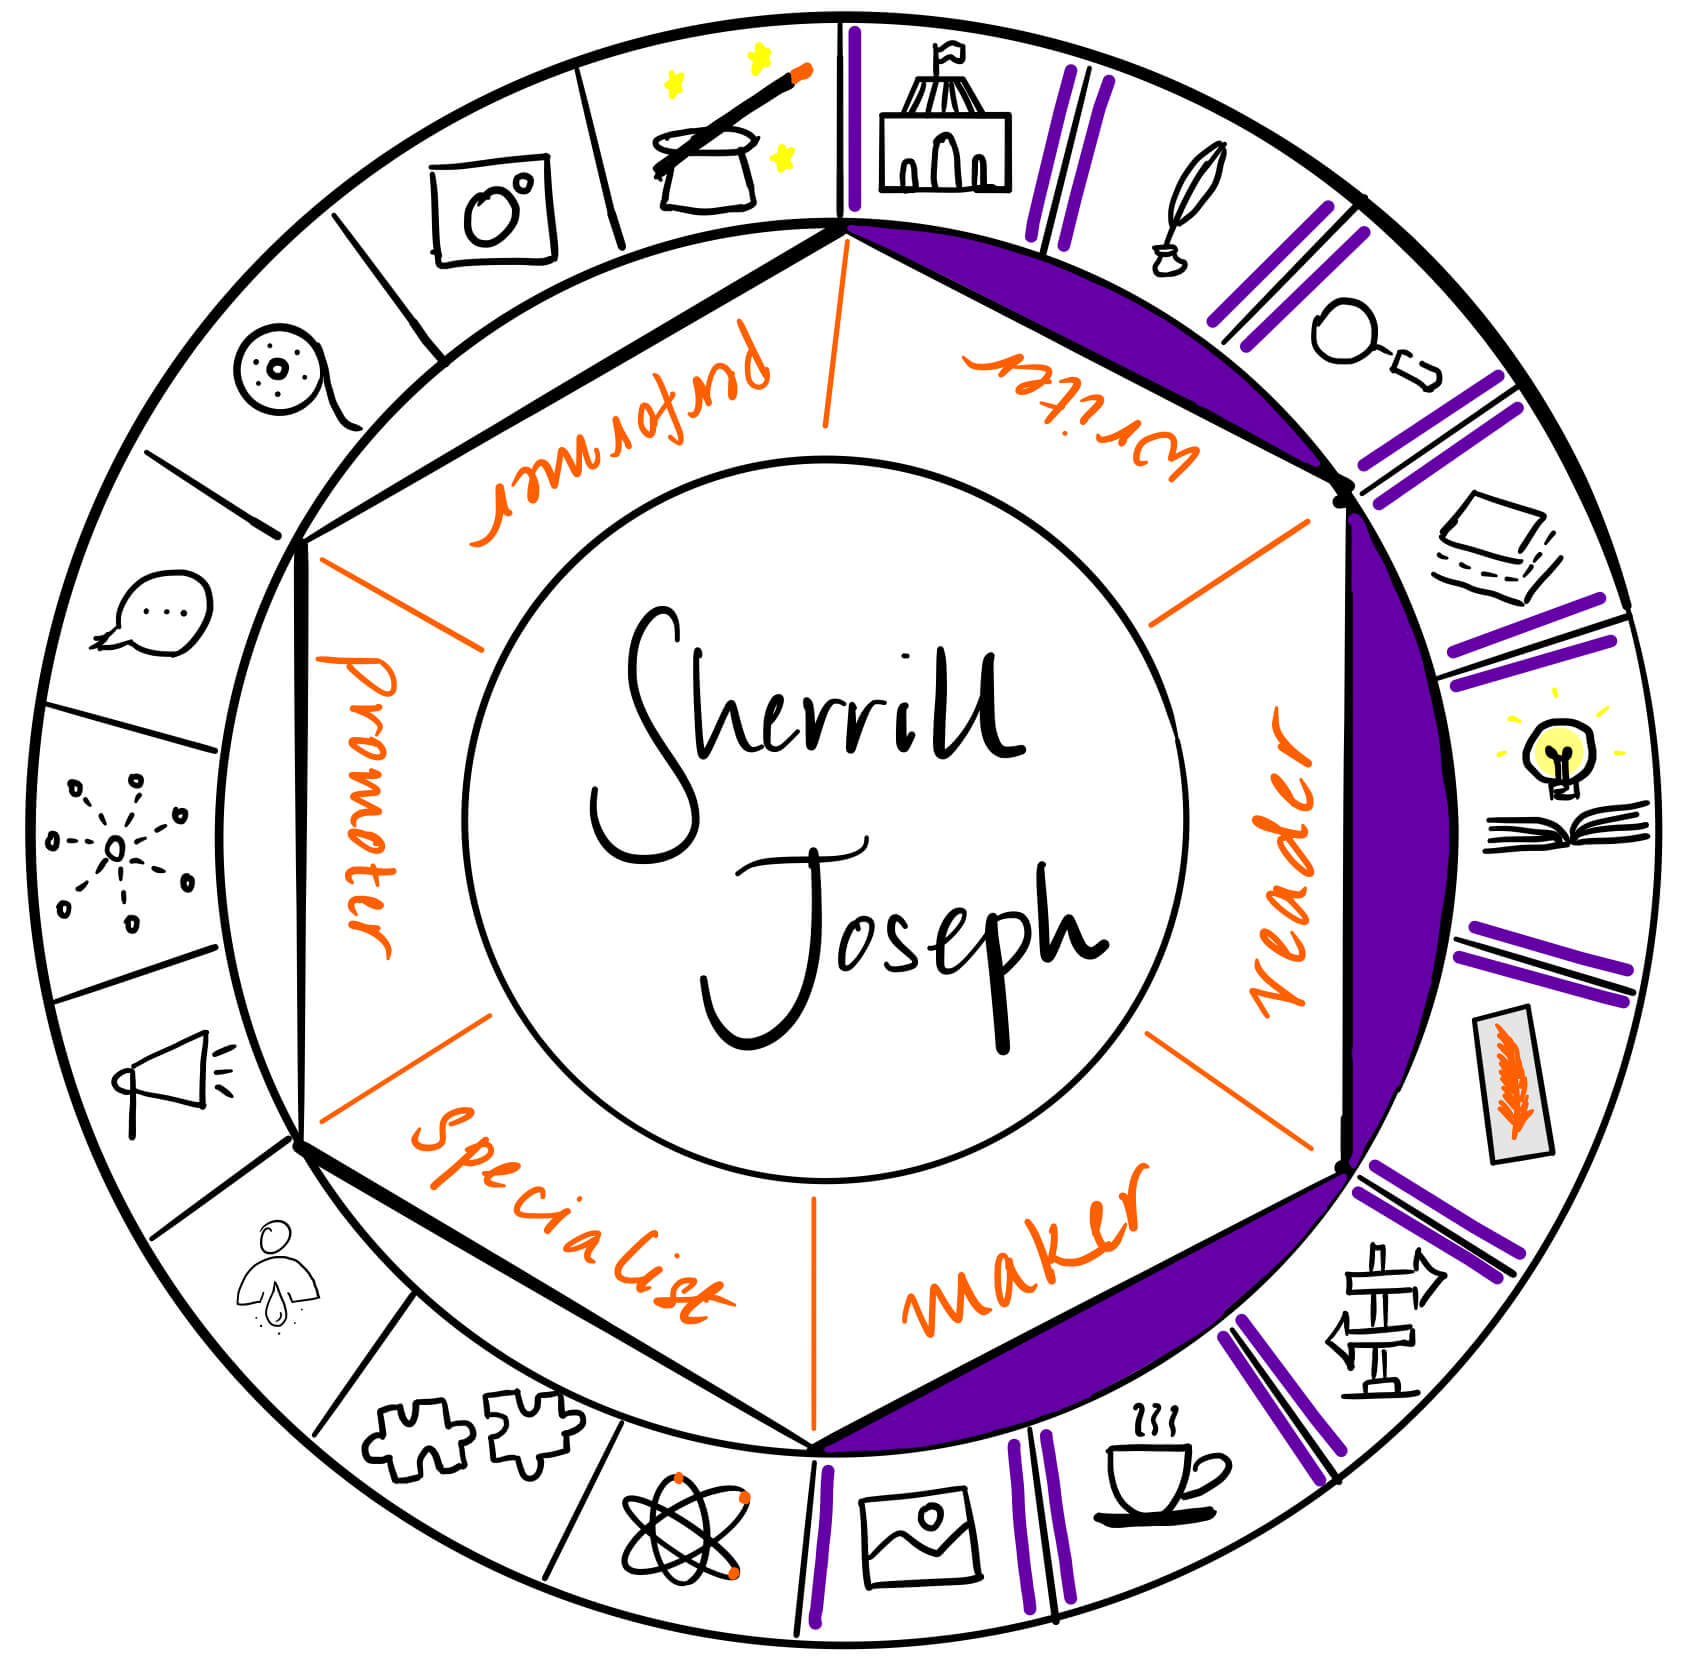 Sherrill Joseph is a writer, reader and maker. It's a pleasure to have her over on The Creator's Roulette to talk about synesthesia, a condition related to simulation of the senses.